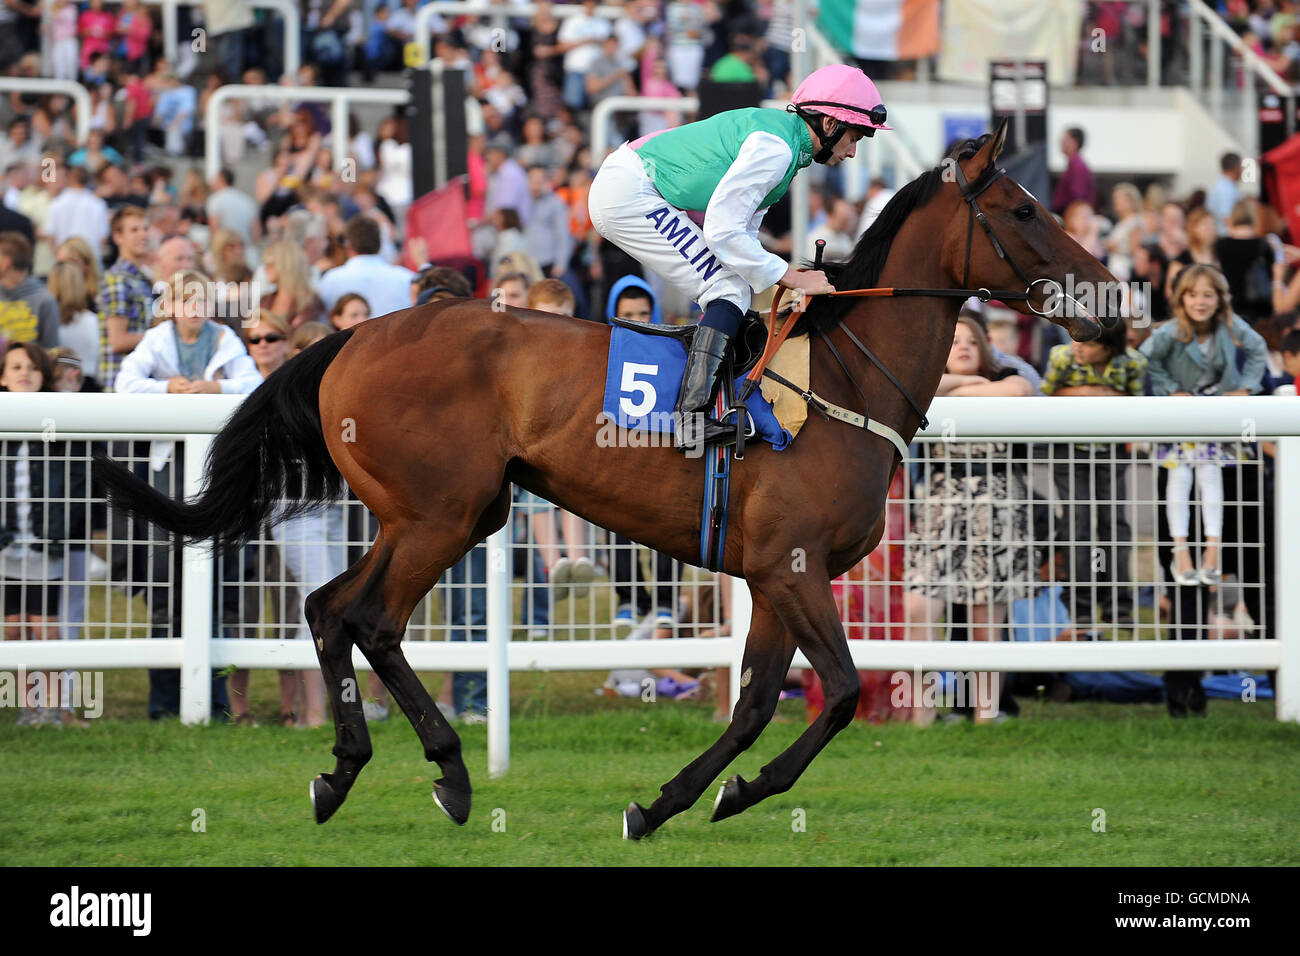 Horse Racing - Epsom Live! featuring JLS - Epsom Downs Racecourse. Mascarene ridden by jockey Ryan Moore going to post prior to the Brothers Pear Cider Maiden Fillies' Stakes Stock Photo